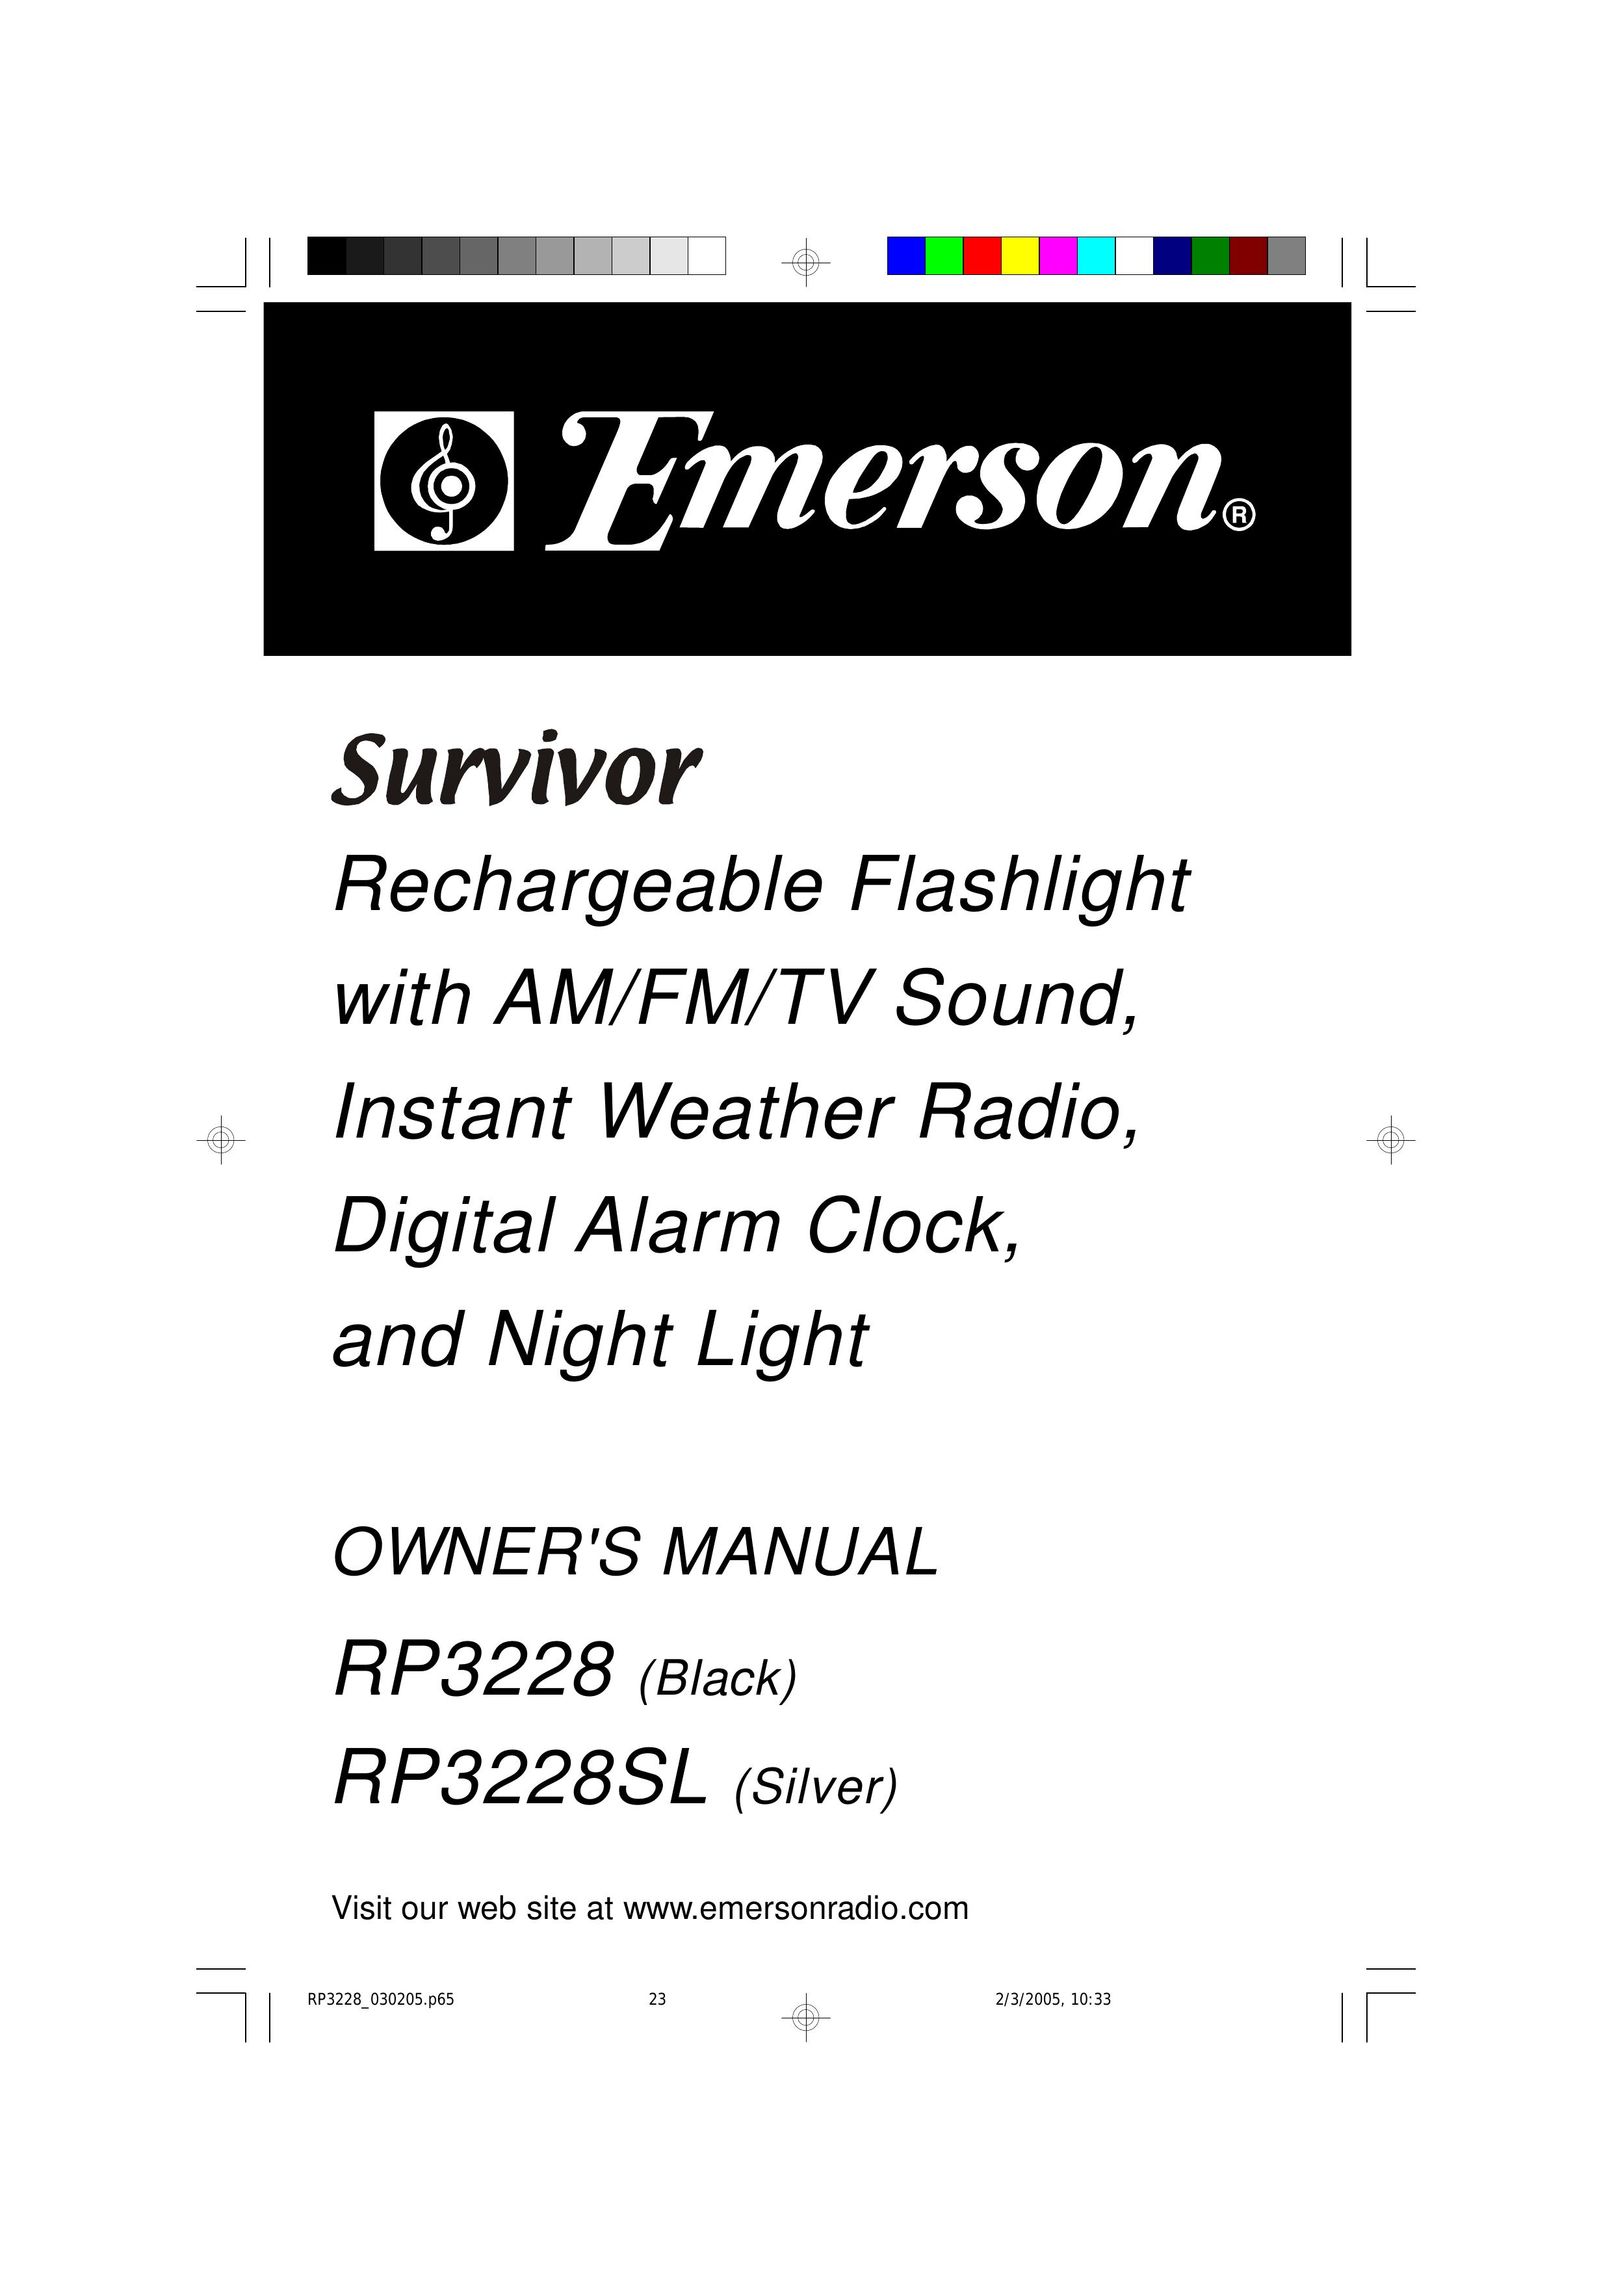 Emerson RP3228 Home Safety Product User Manual